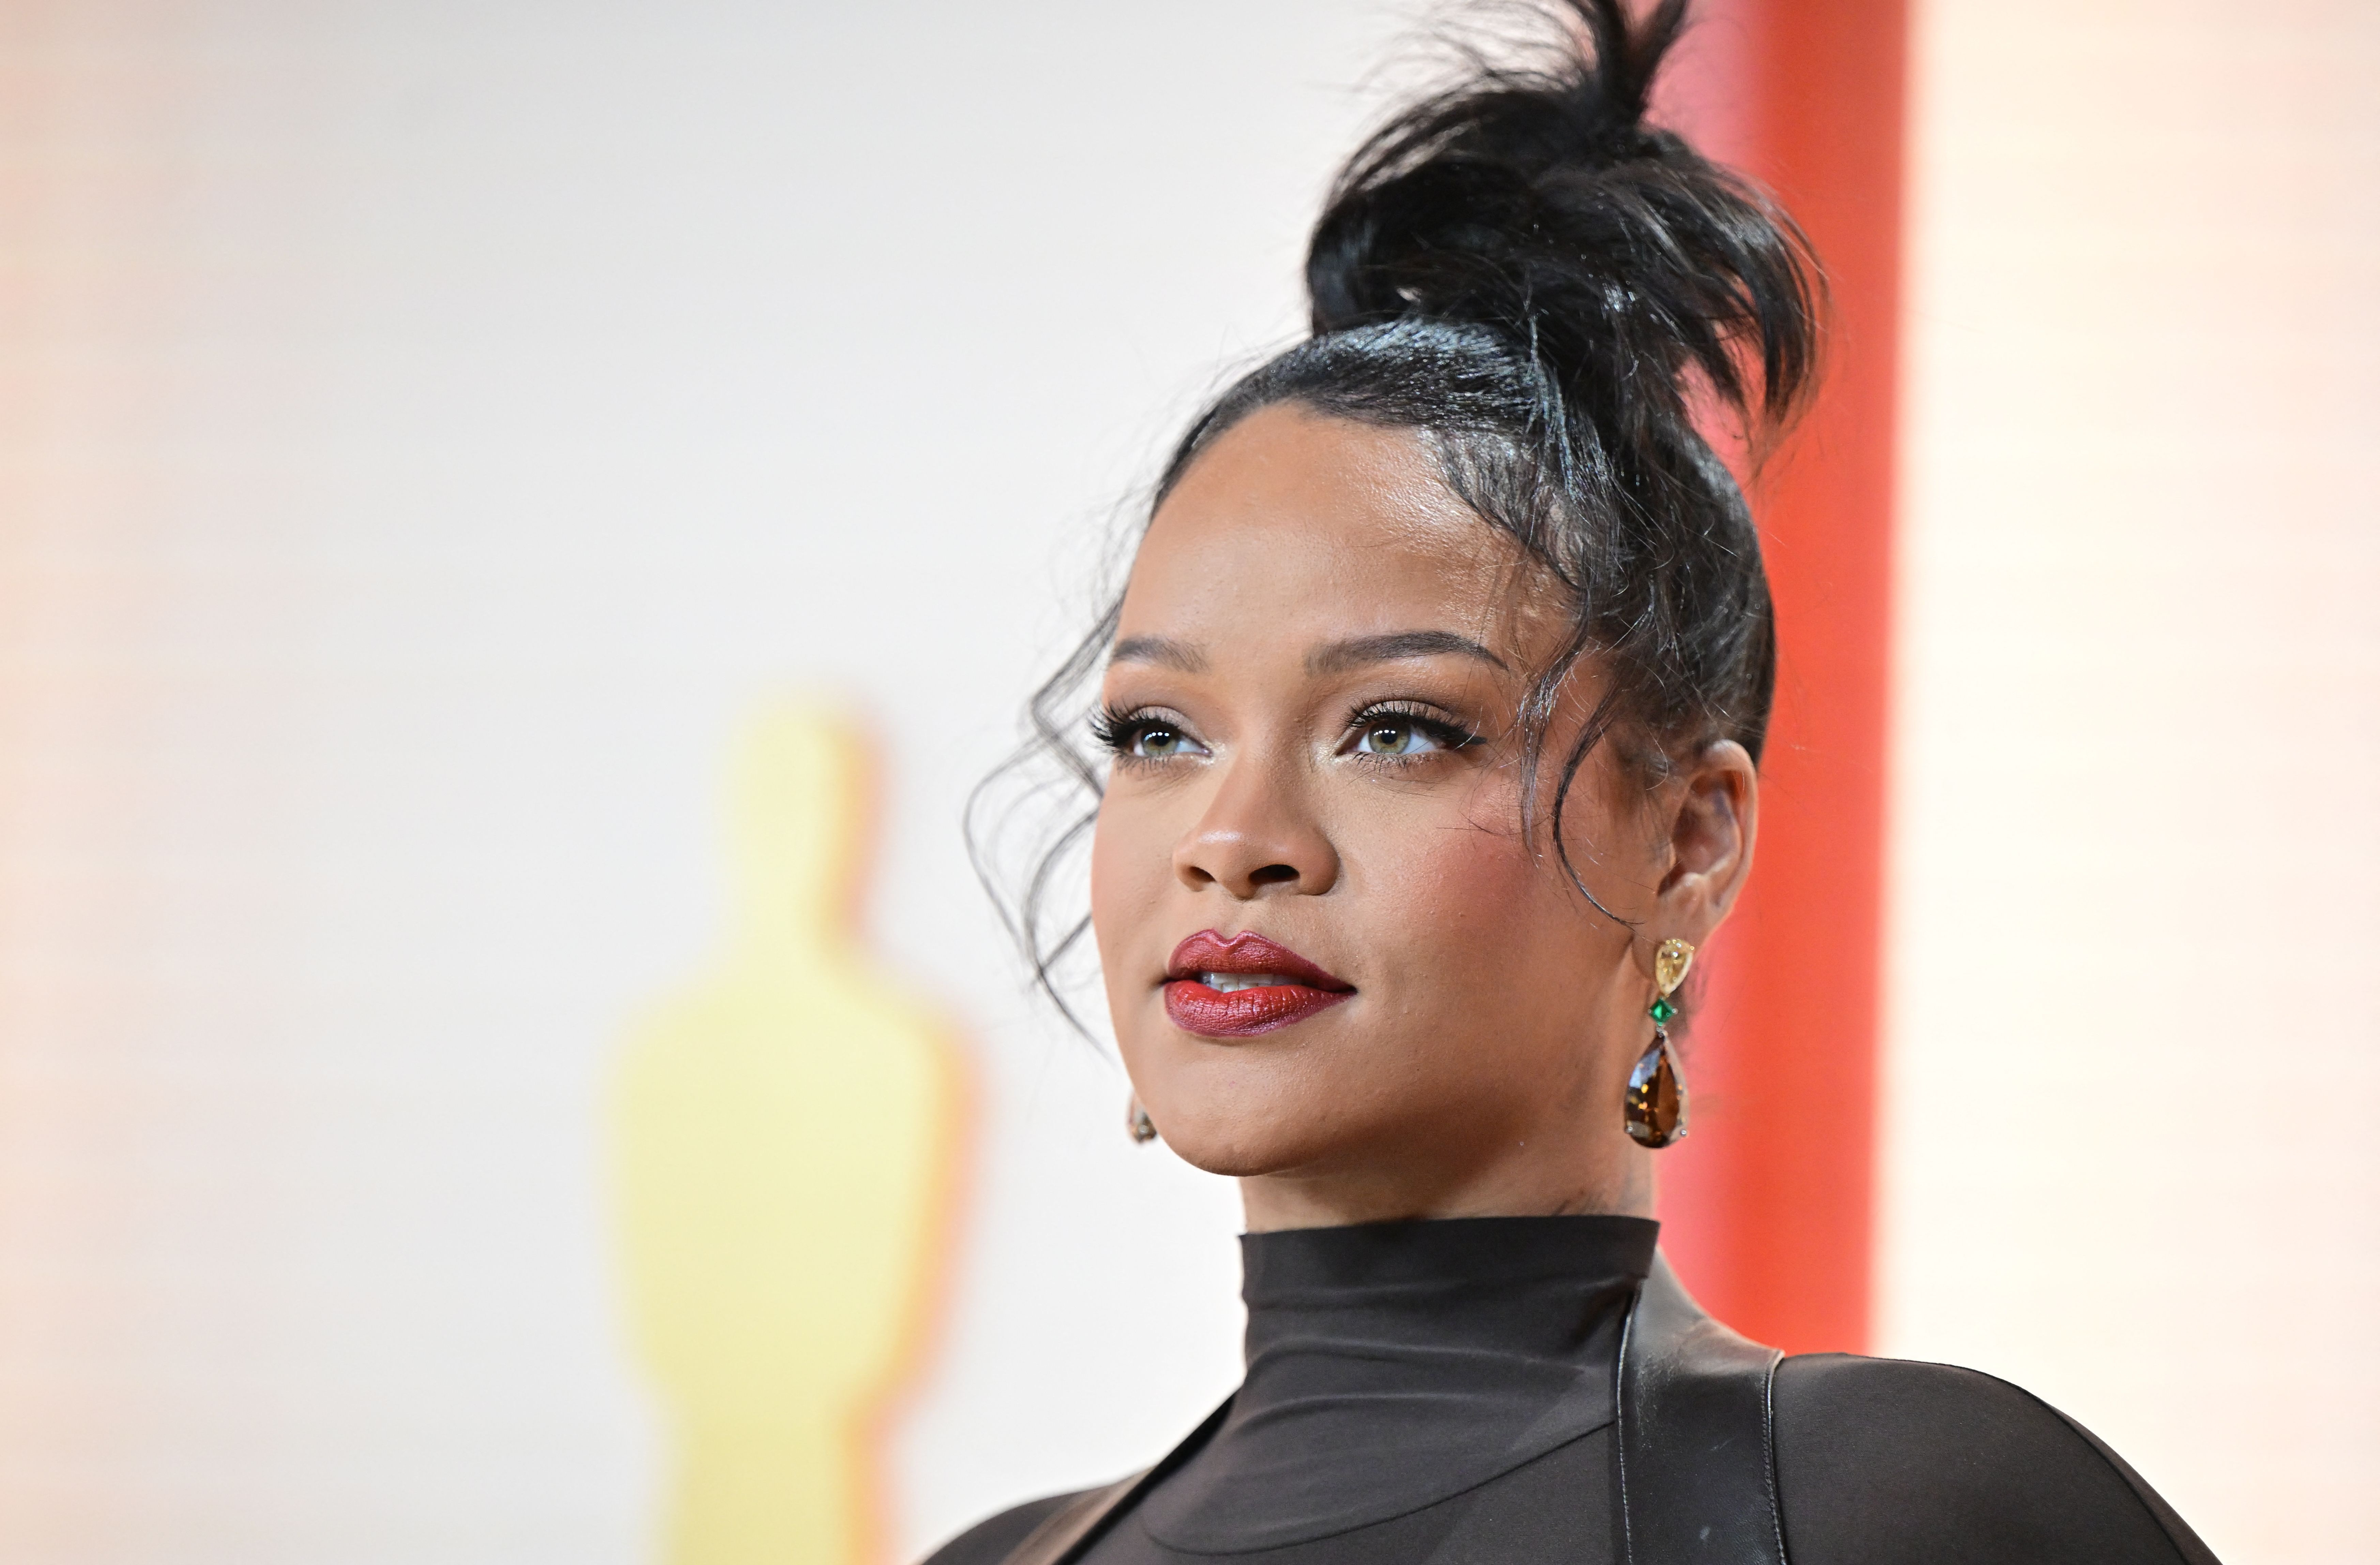 We can't get enough of Rihanna's blonde side-sweeping hairstyle